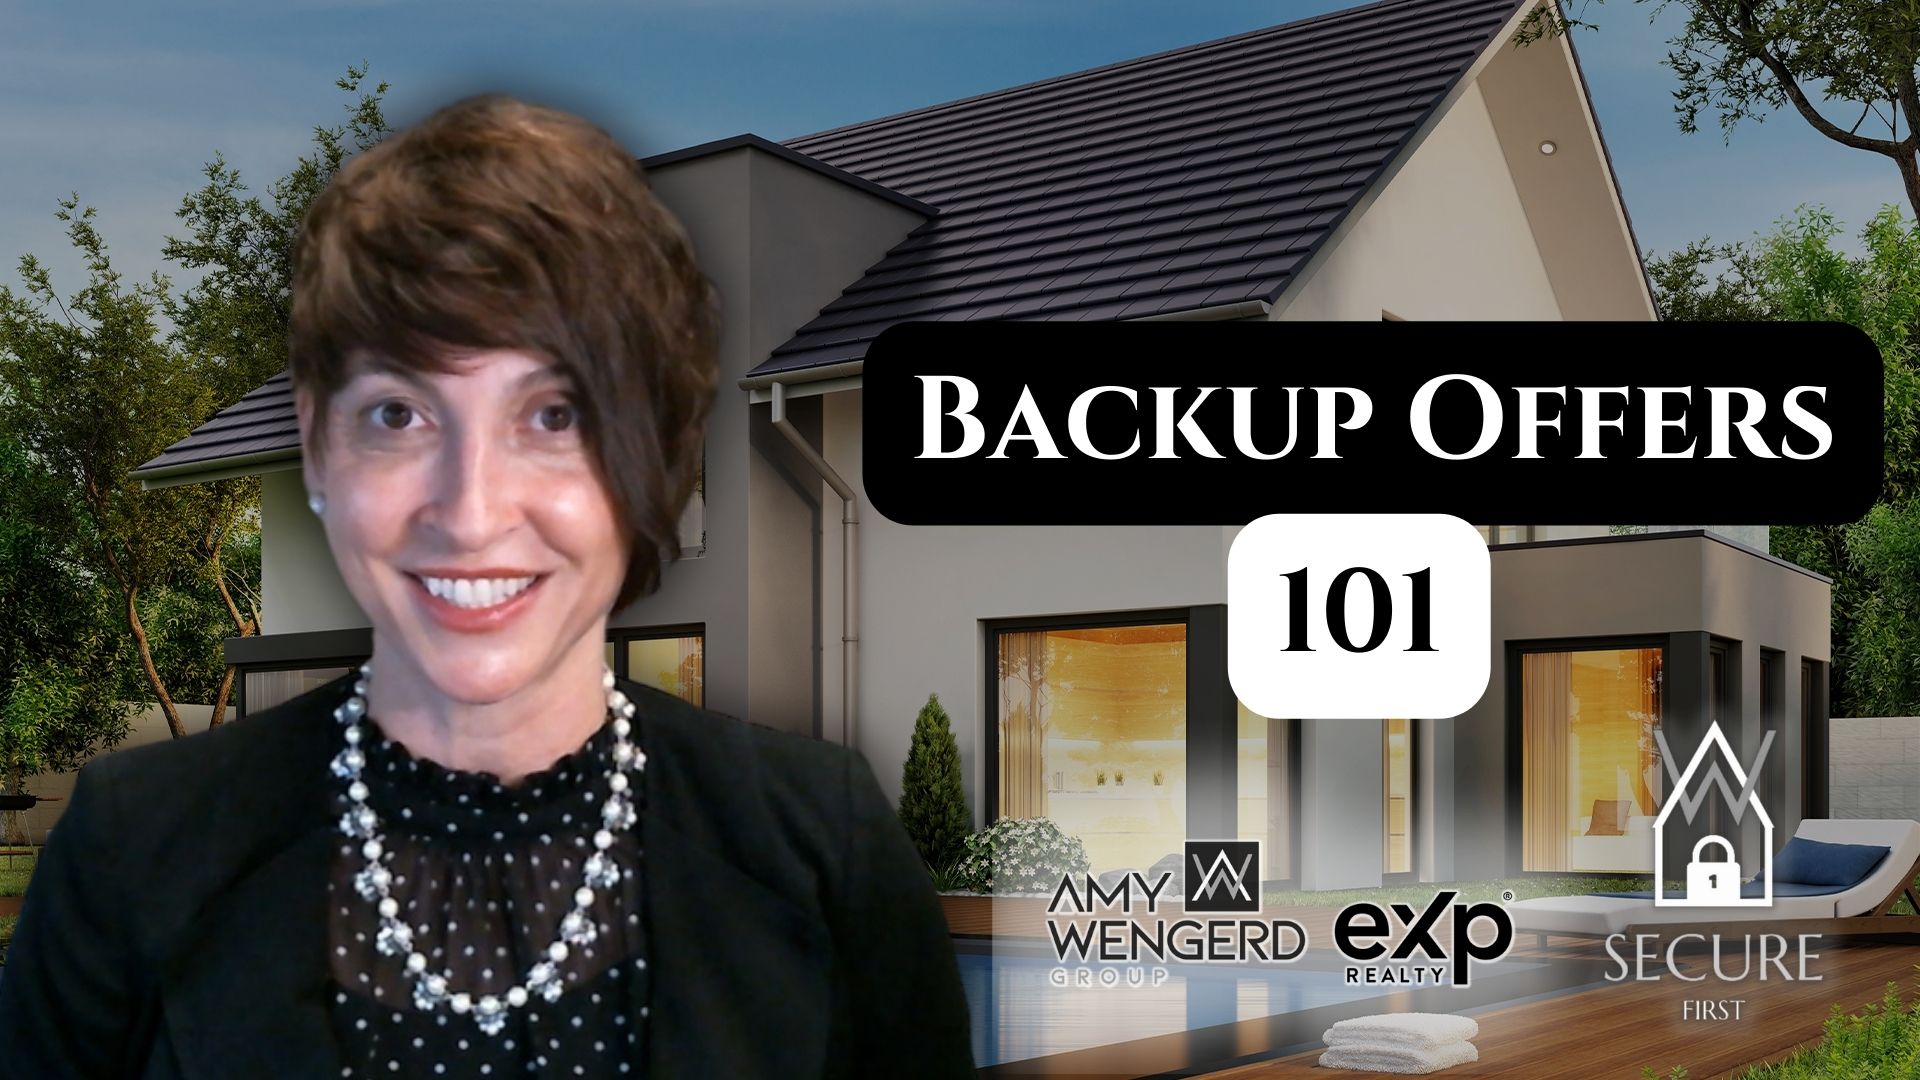 Backup Offers in Our Hot Spring Housing Market